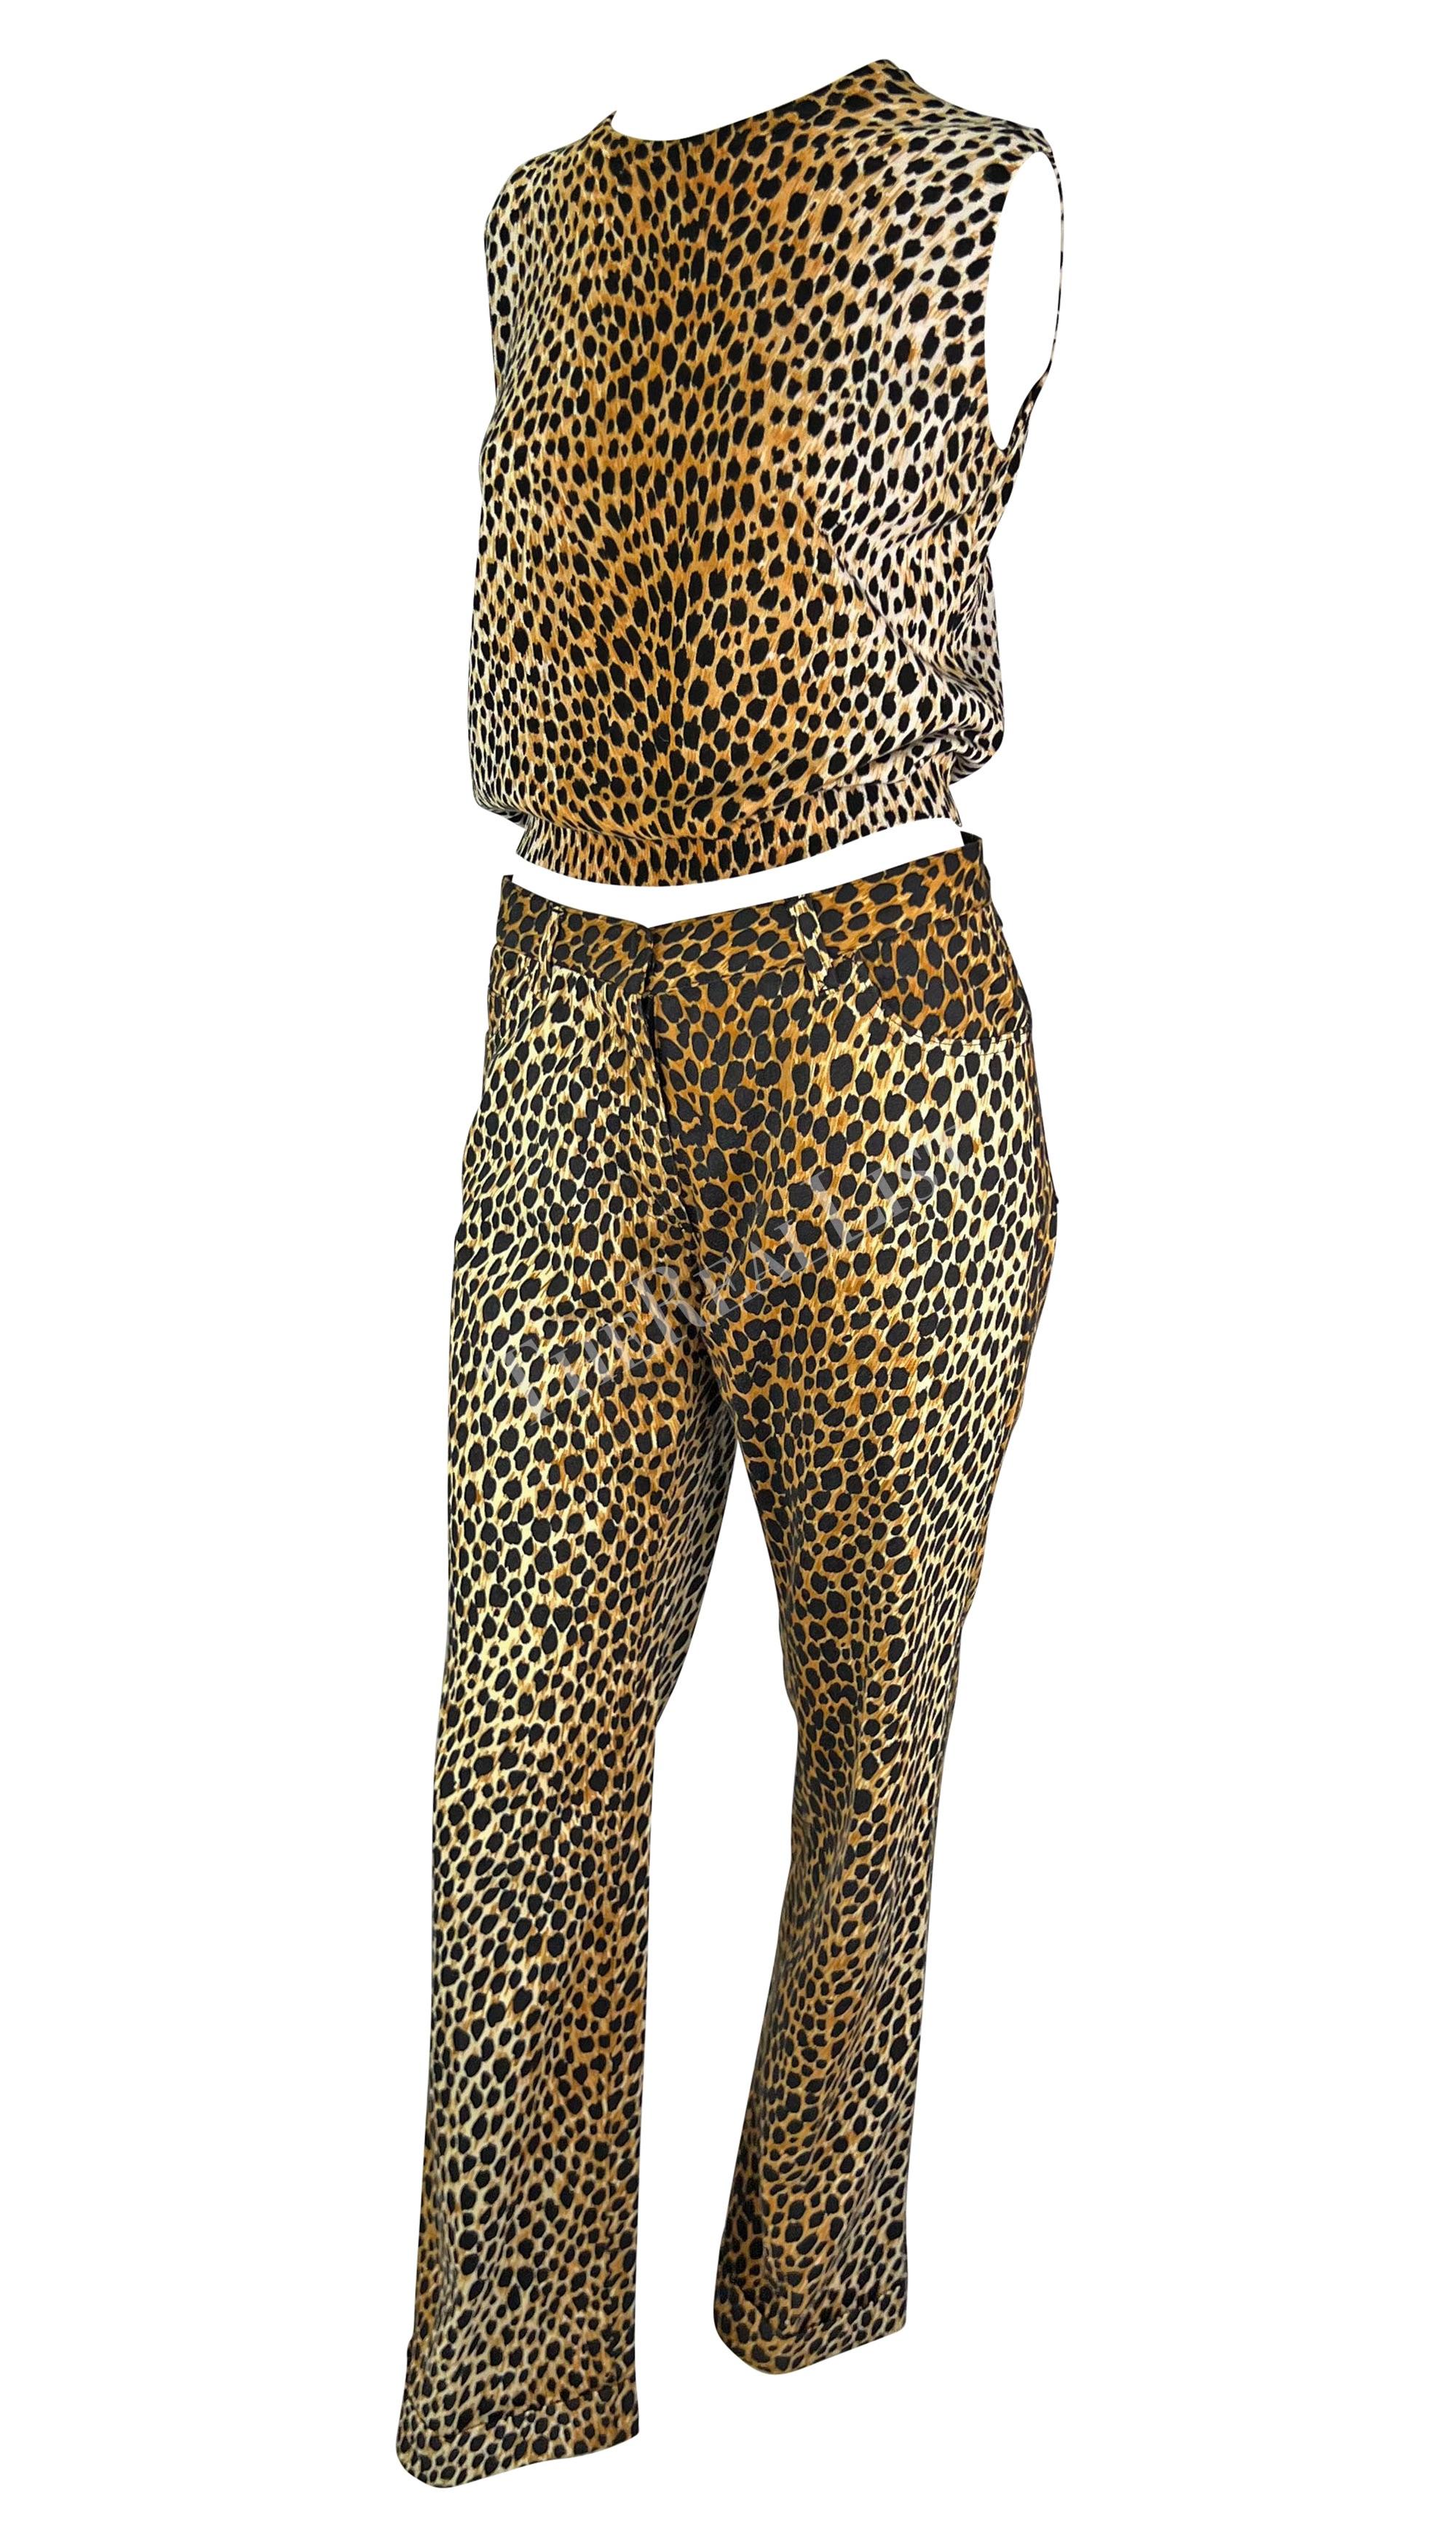 Presenting a fabulous cheetah print Dolce & Gabbana pant set. From the late 1990s/early 2000s, the ensemble features a chic cheetah print vest and coordinating flared pants. Worn as a set or separated, these pieces guarantee a distinctive and